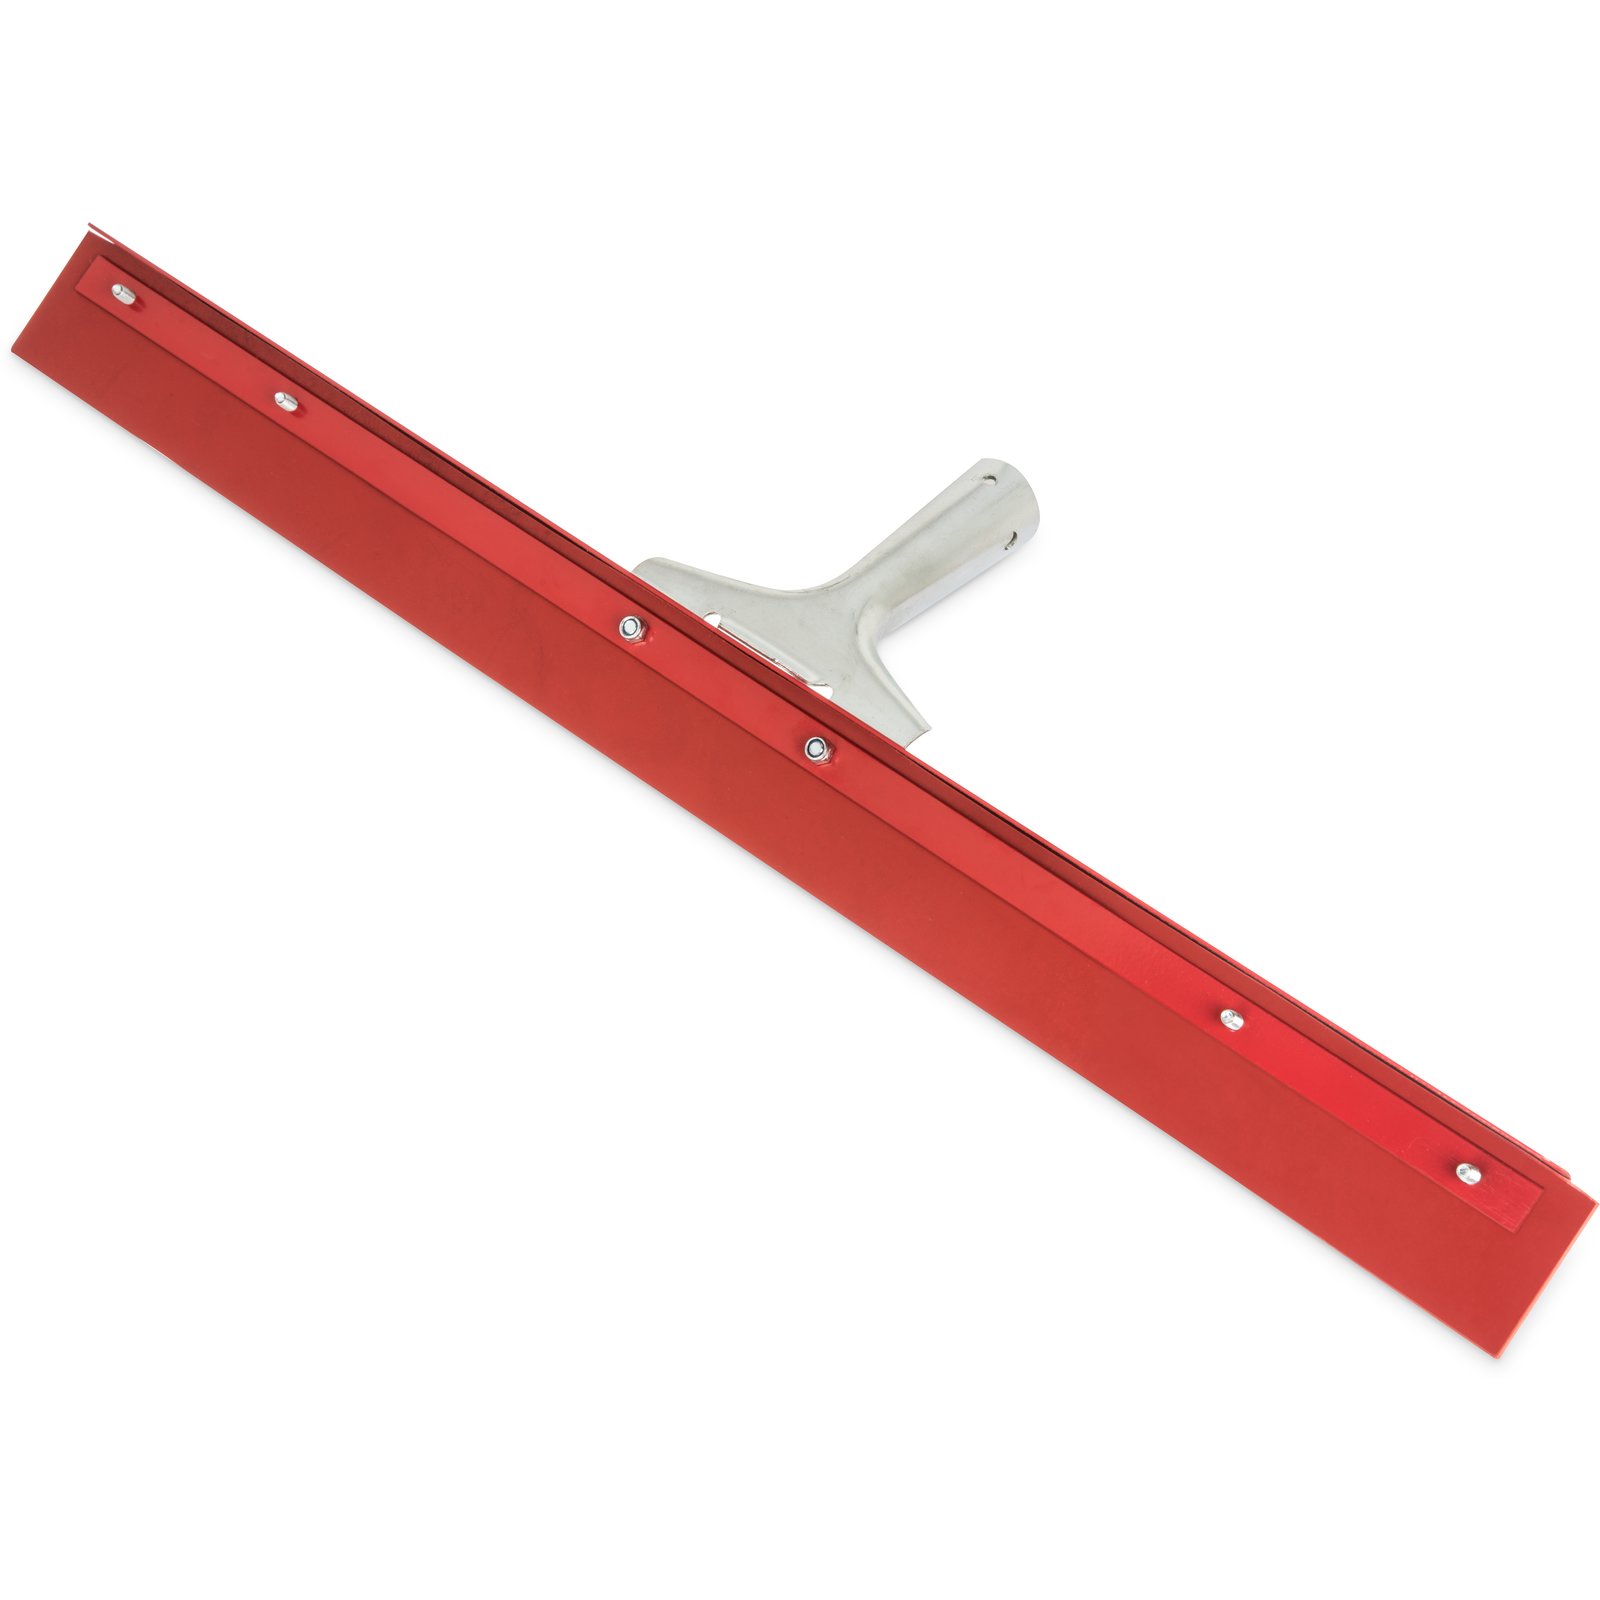 Squeegee 24 inch Straight Flat Red Silicone in Steel Frame Case 6, from Brush Man Inc.